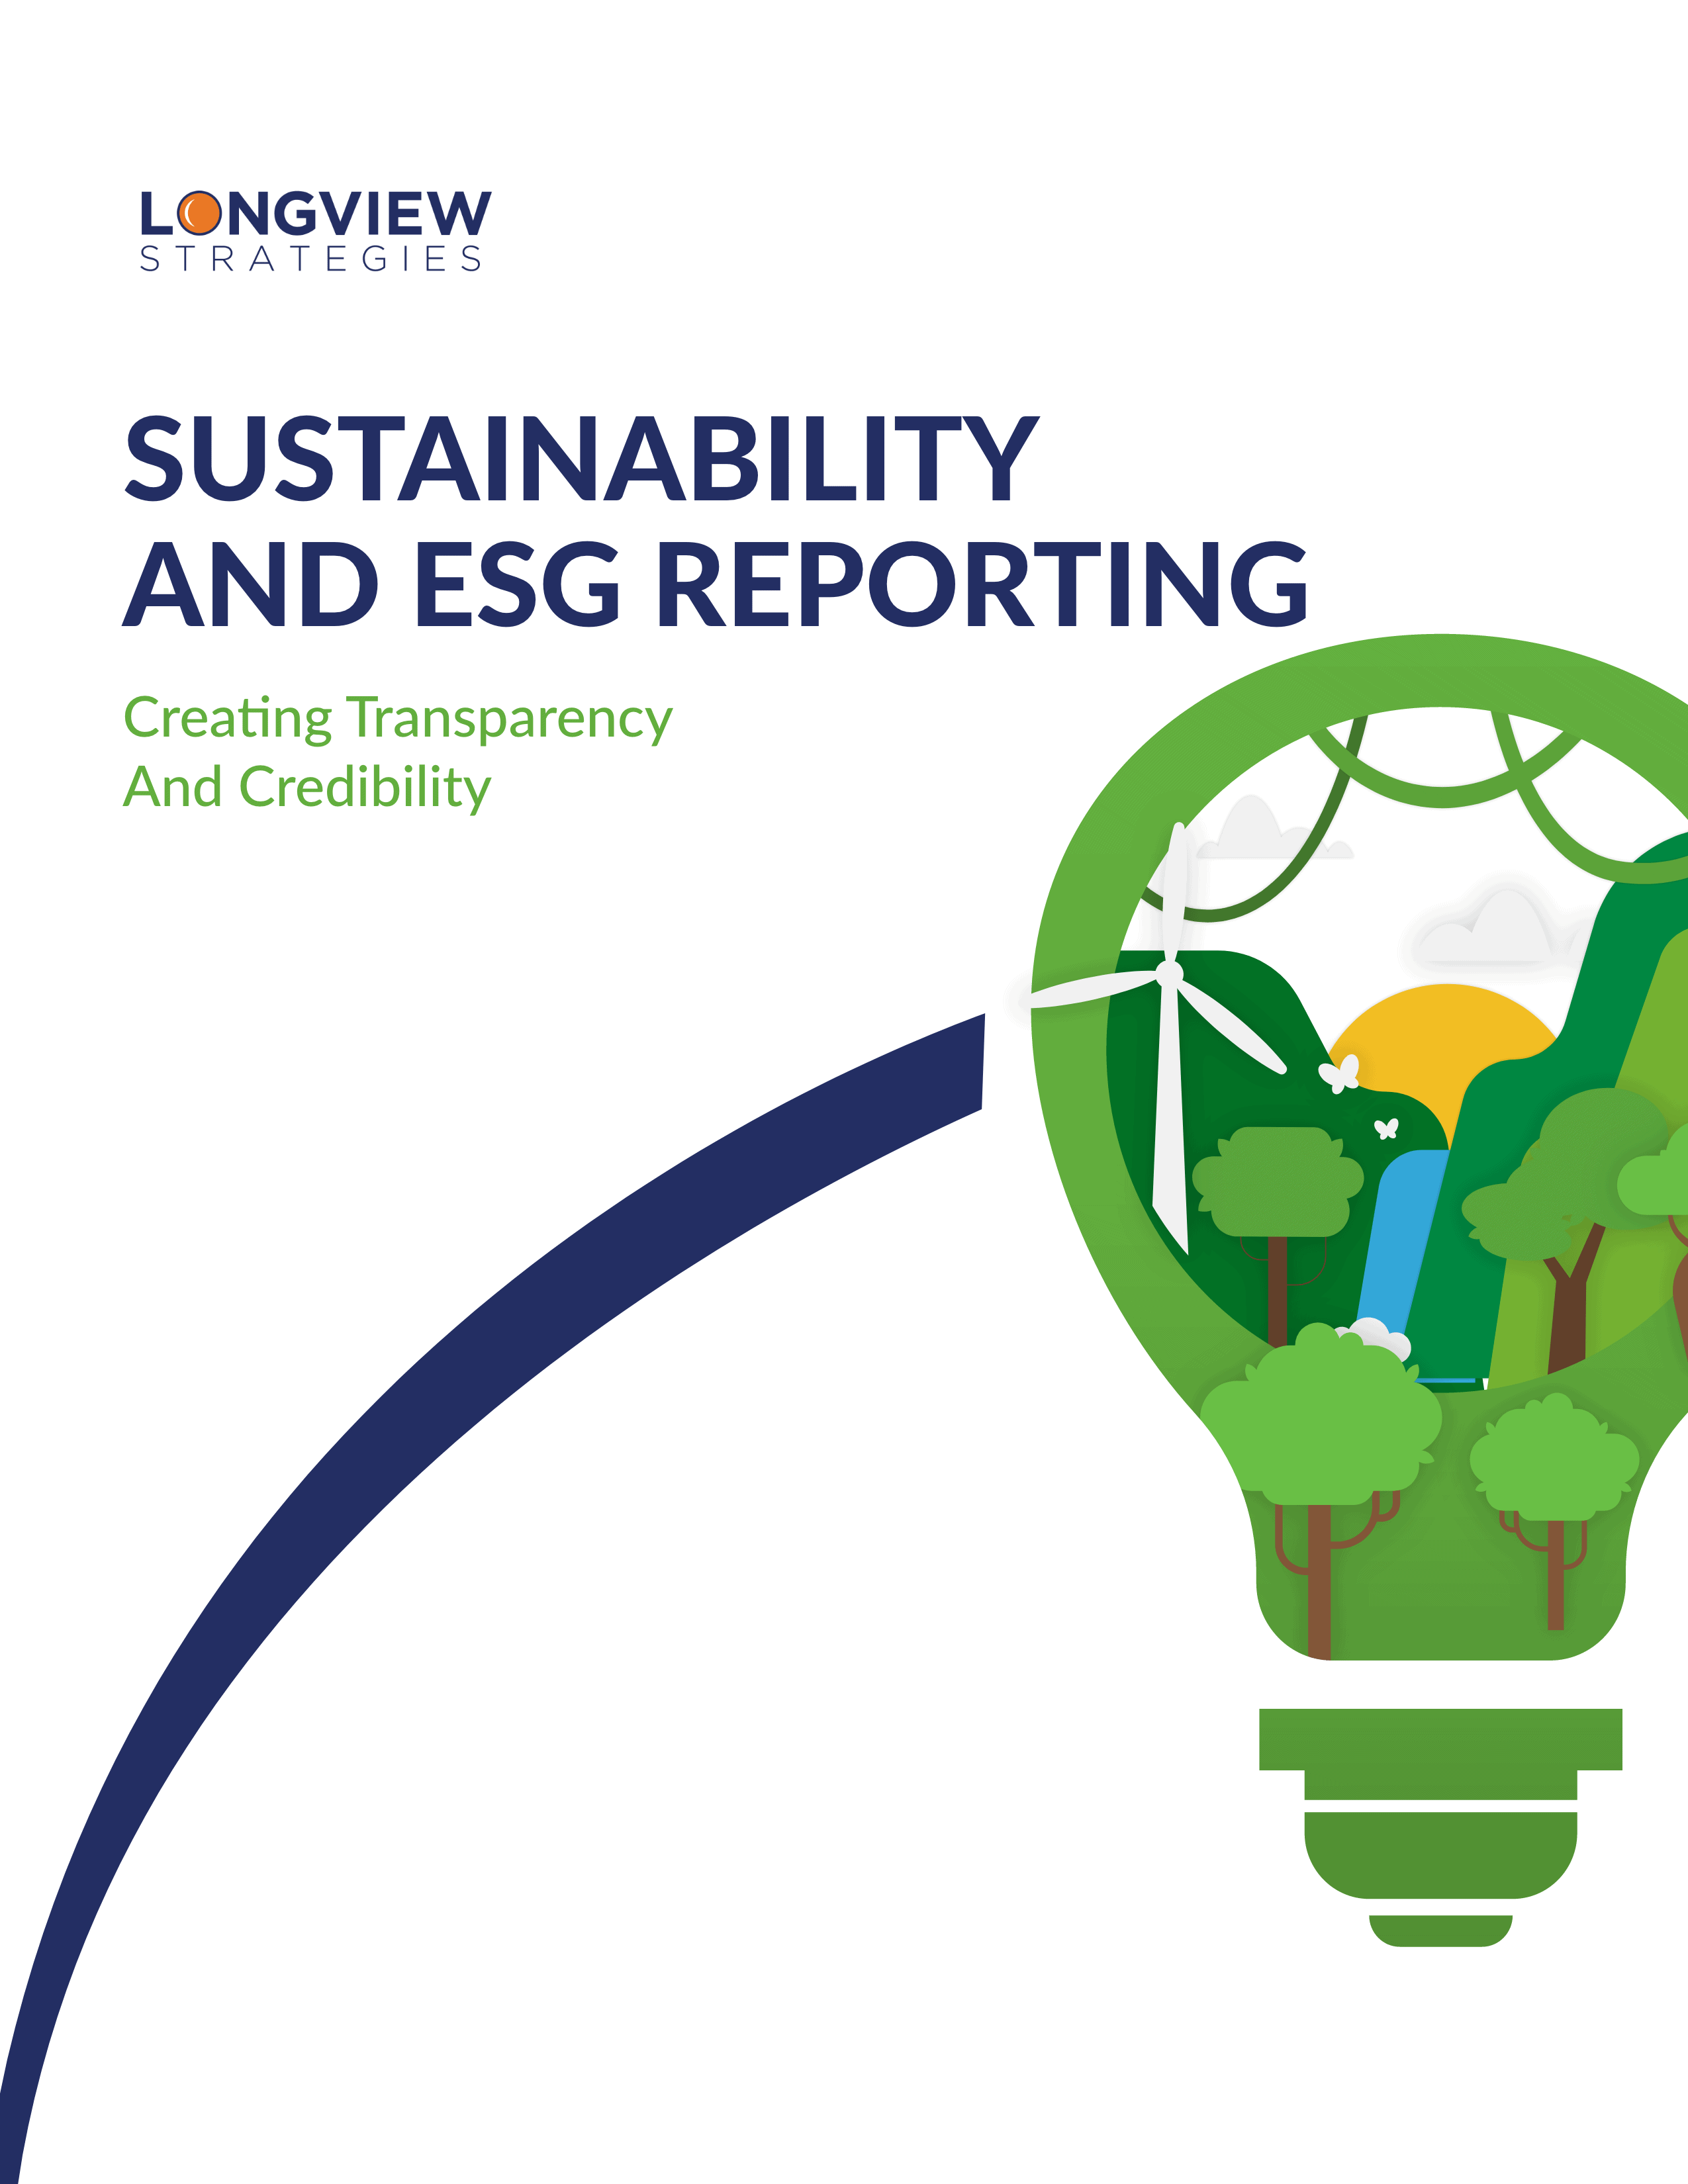 Sustainability and ESG Reporting • Longview Strategies